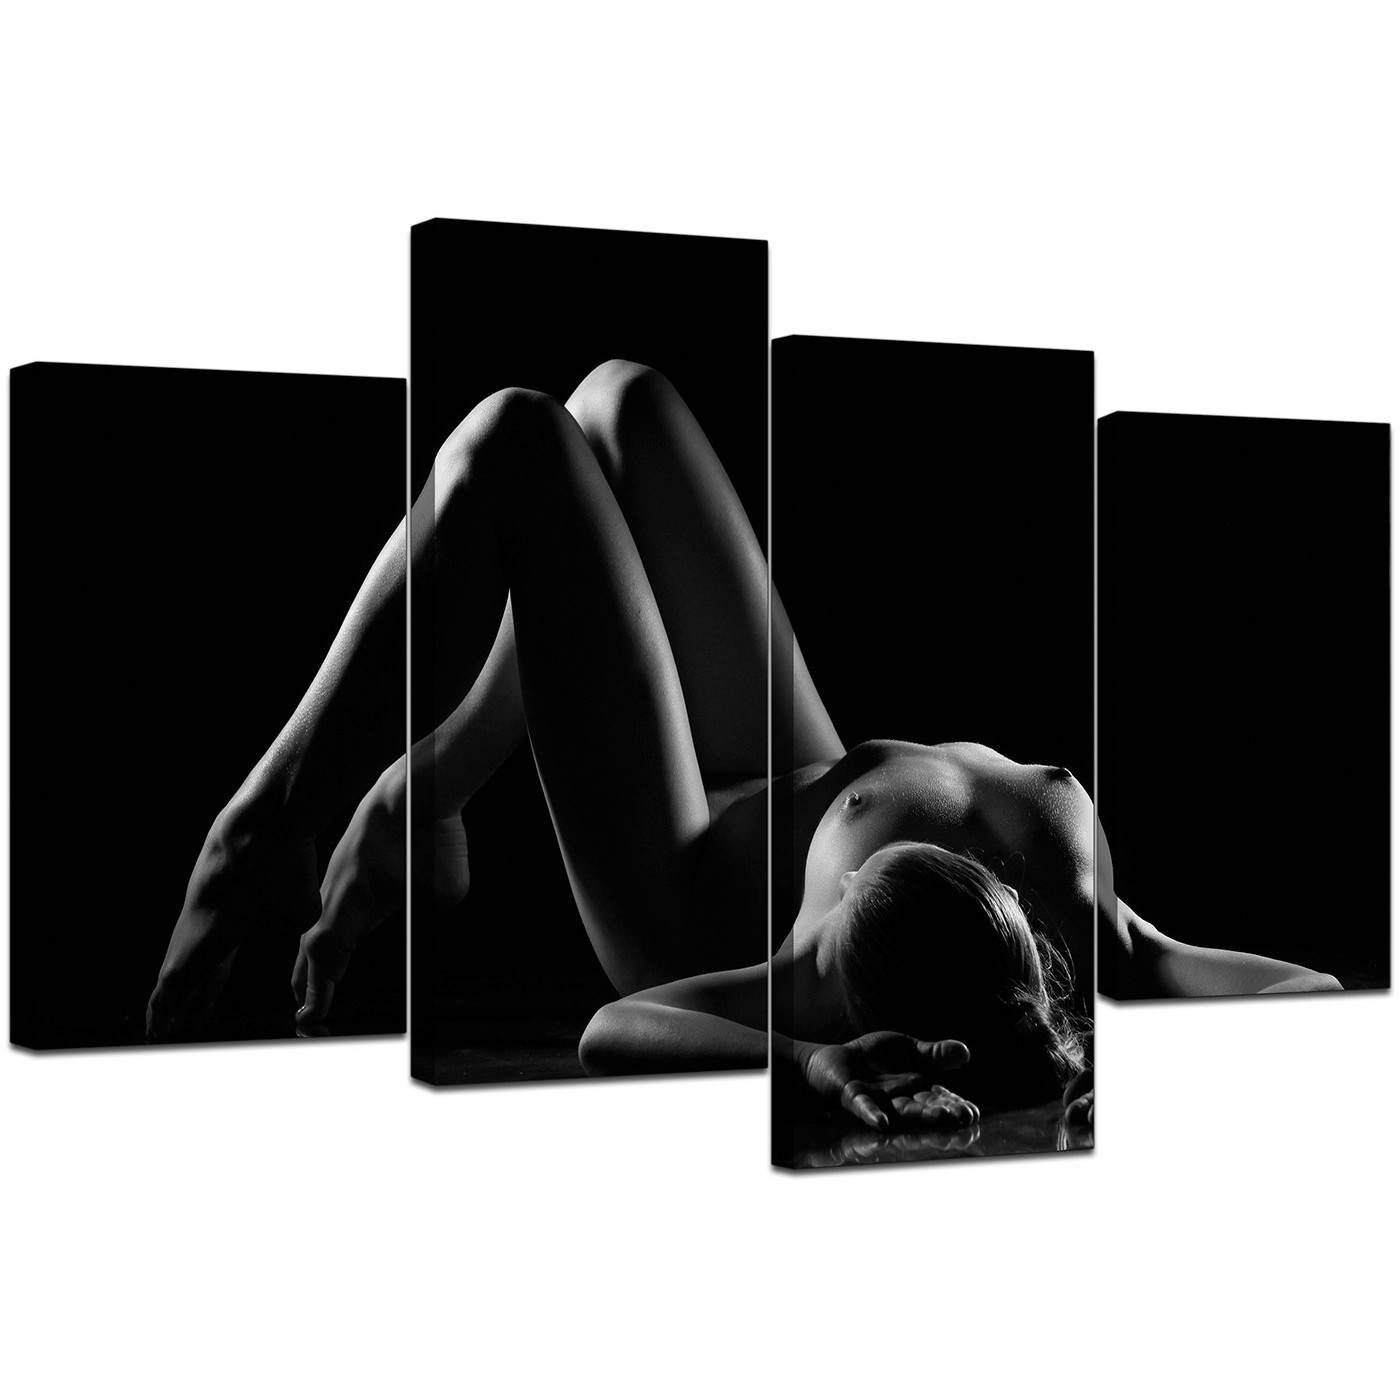 Sensual Canvas Art In Black & White For Your Bedroom Pertaining To Latest Large Black And White Wall Art (View 4 of 20)